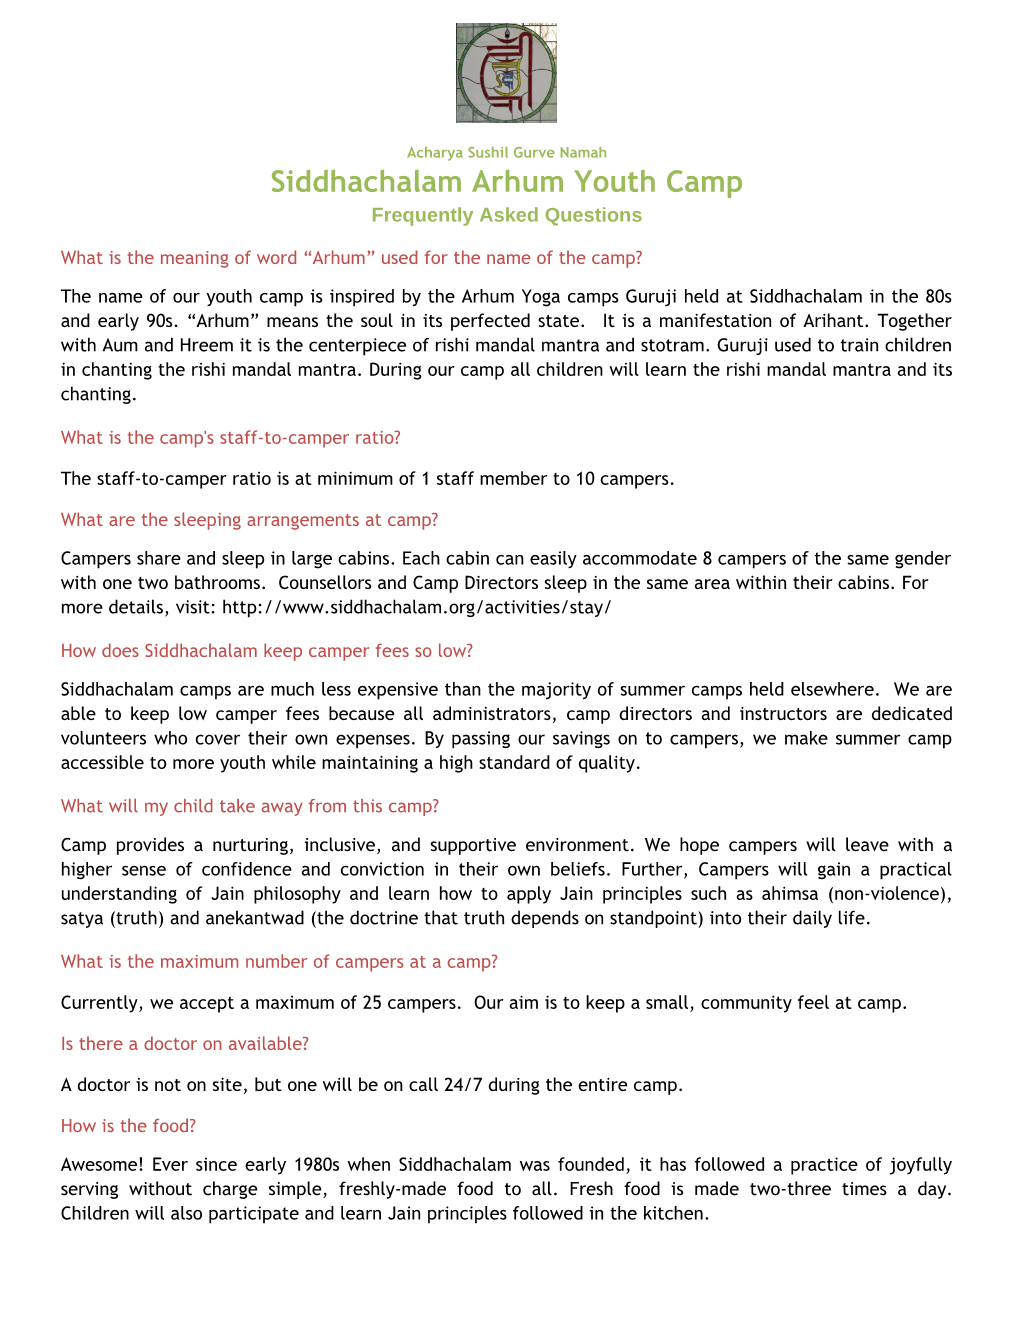 Siddhachalam Arhum Youth Camp Frequently Asked Questions